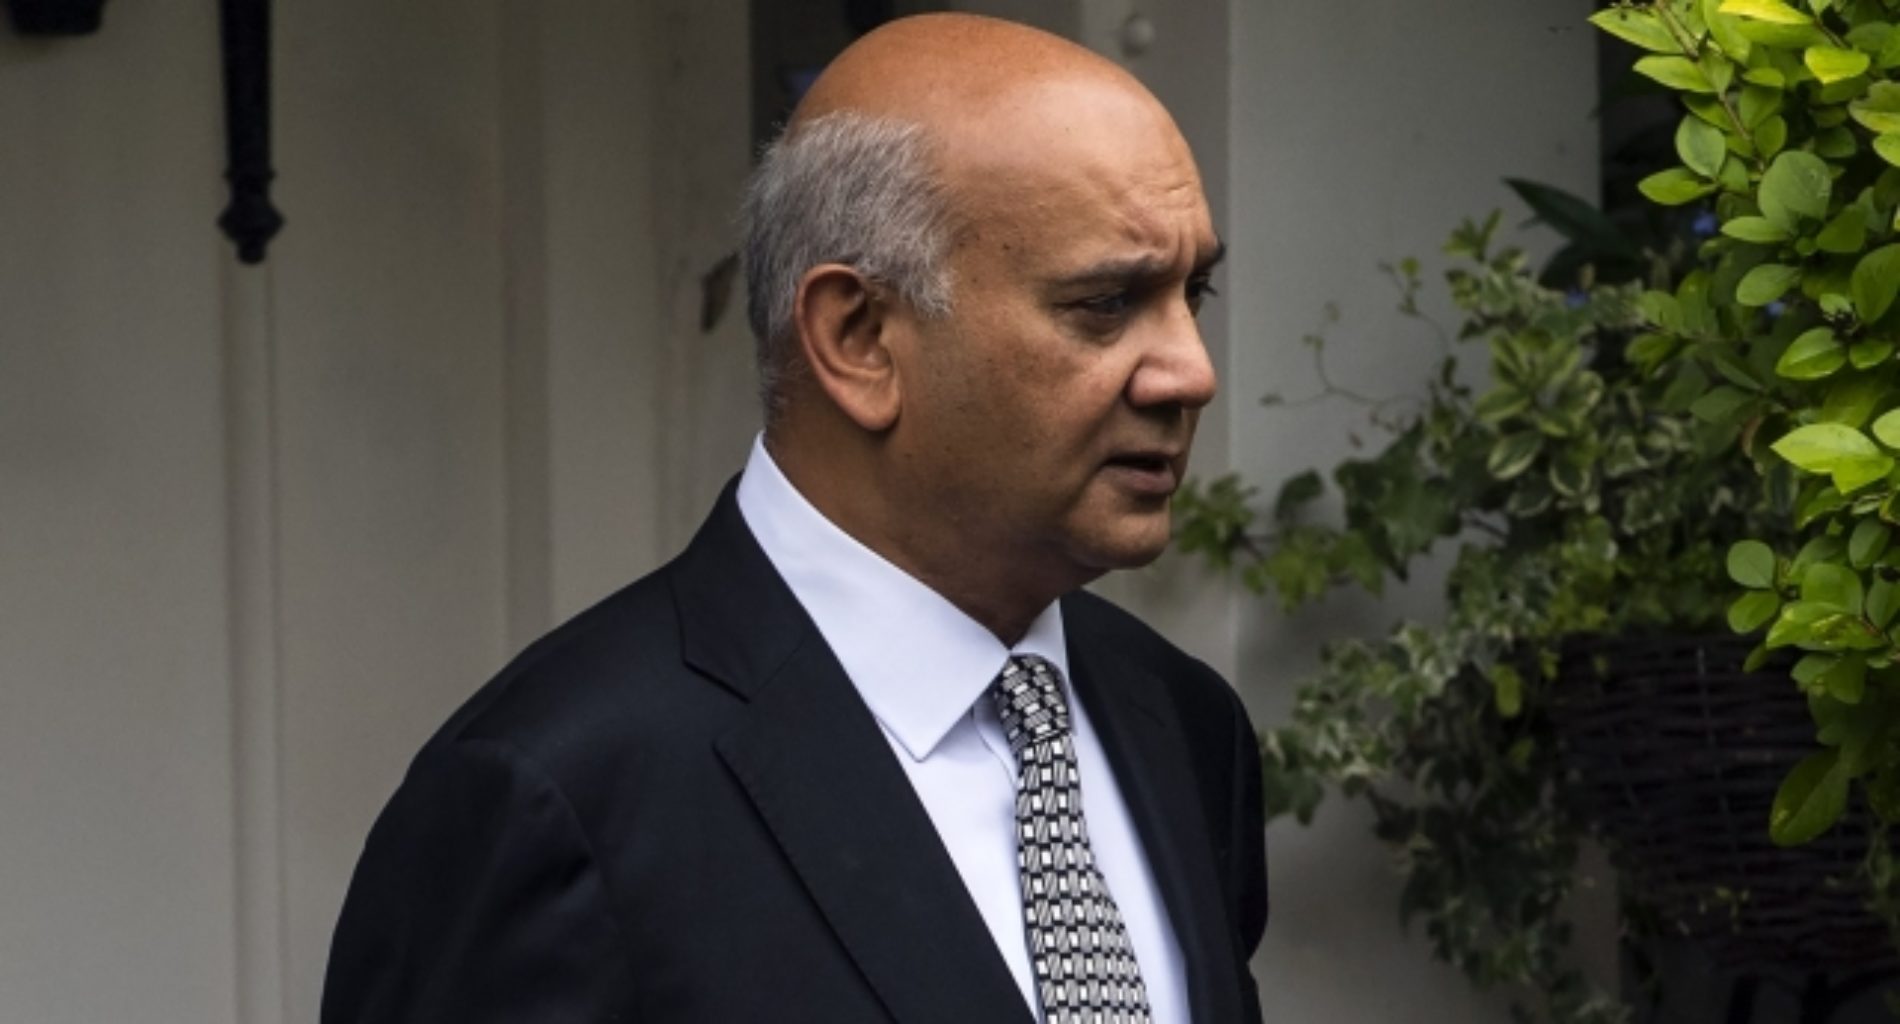 Labour MP Keith Vaz ‘was suicidal’ after tabloid outed him in rent boy scandal